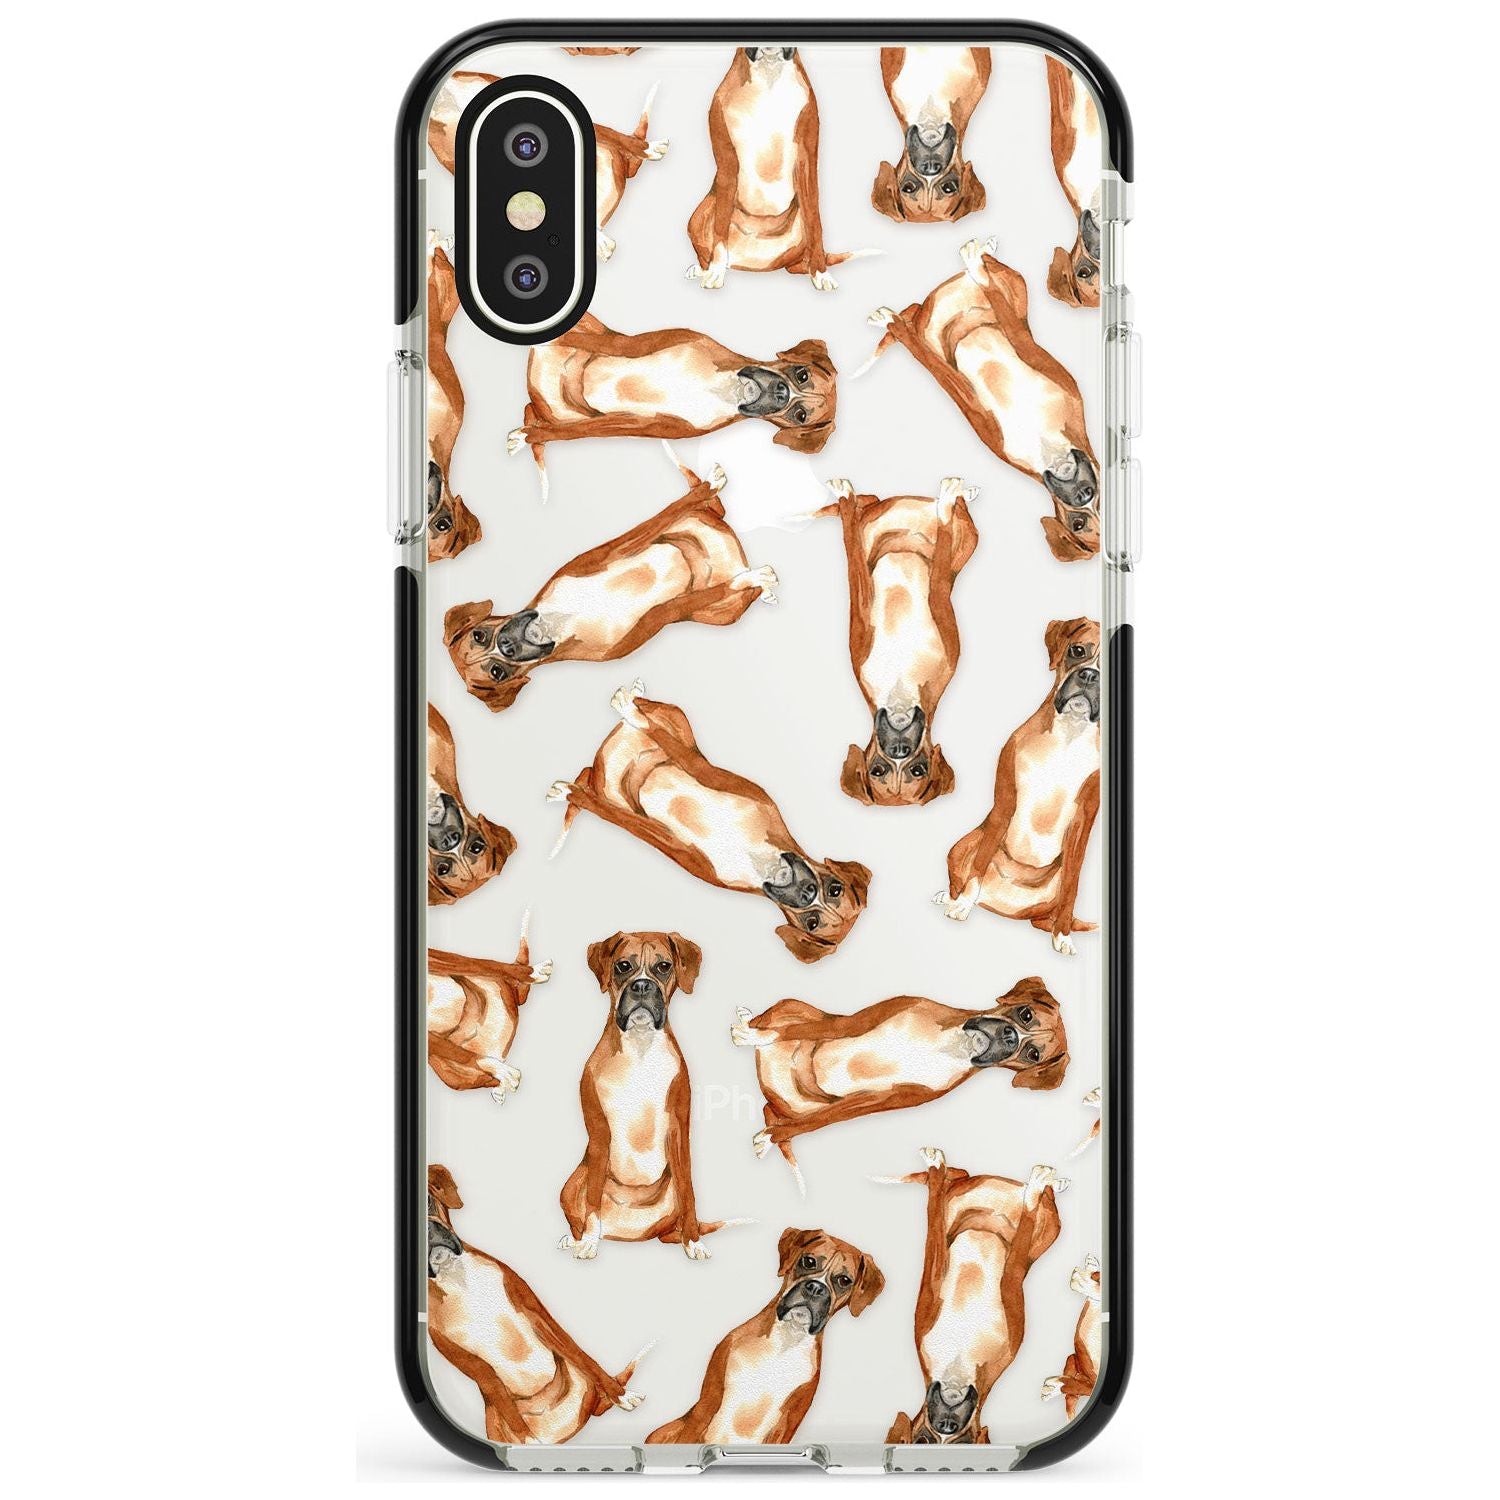 Boxer Watercolour Dog Pattern Black Impact Phone Case for iPhone X XS Max XR